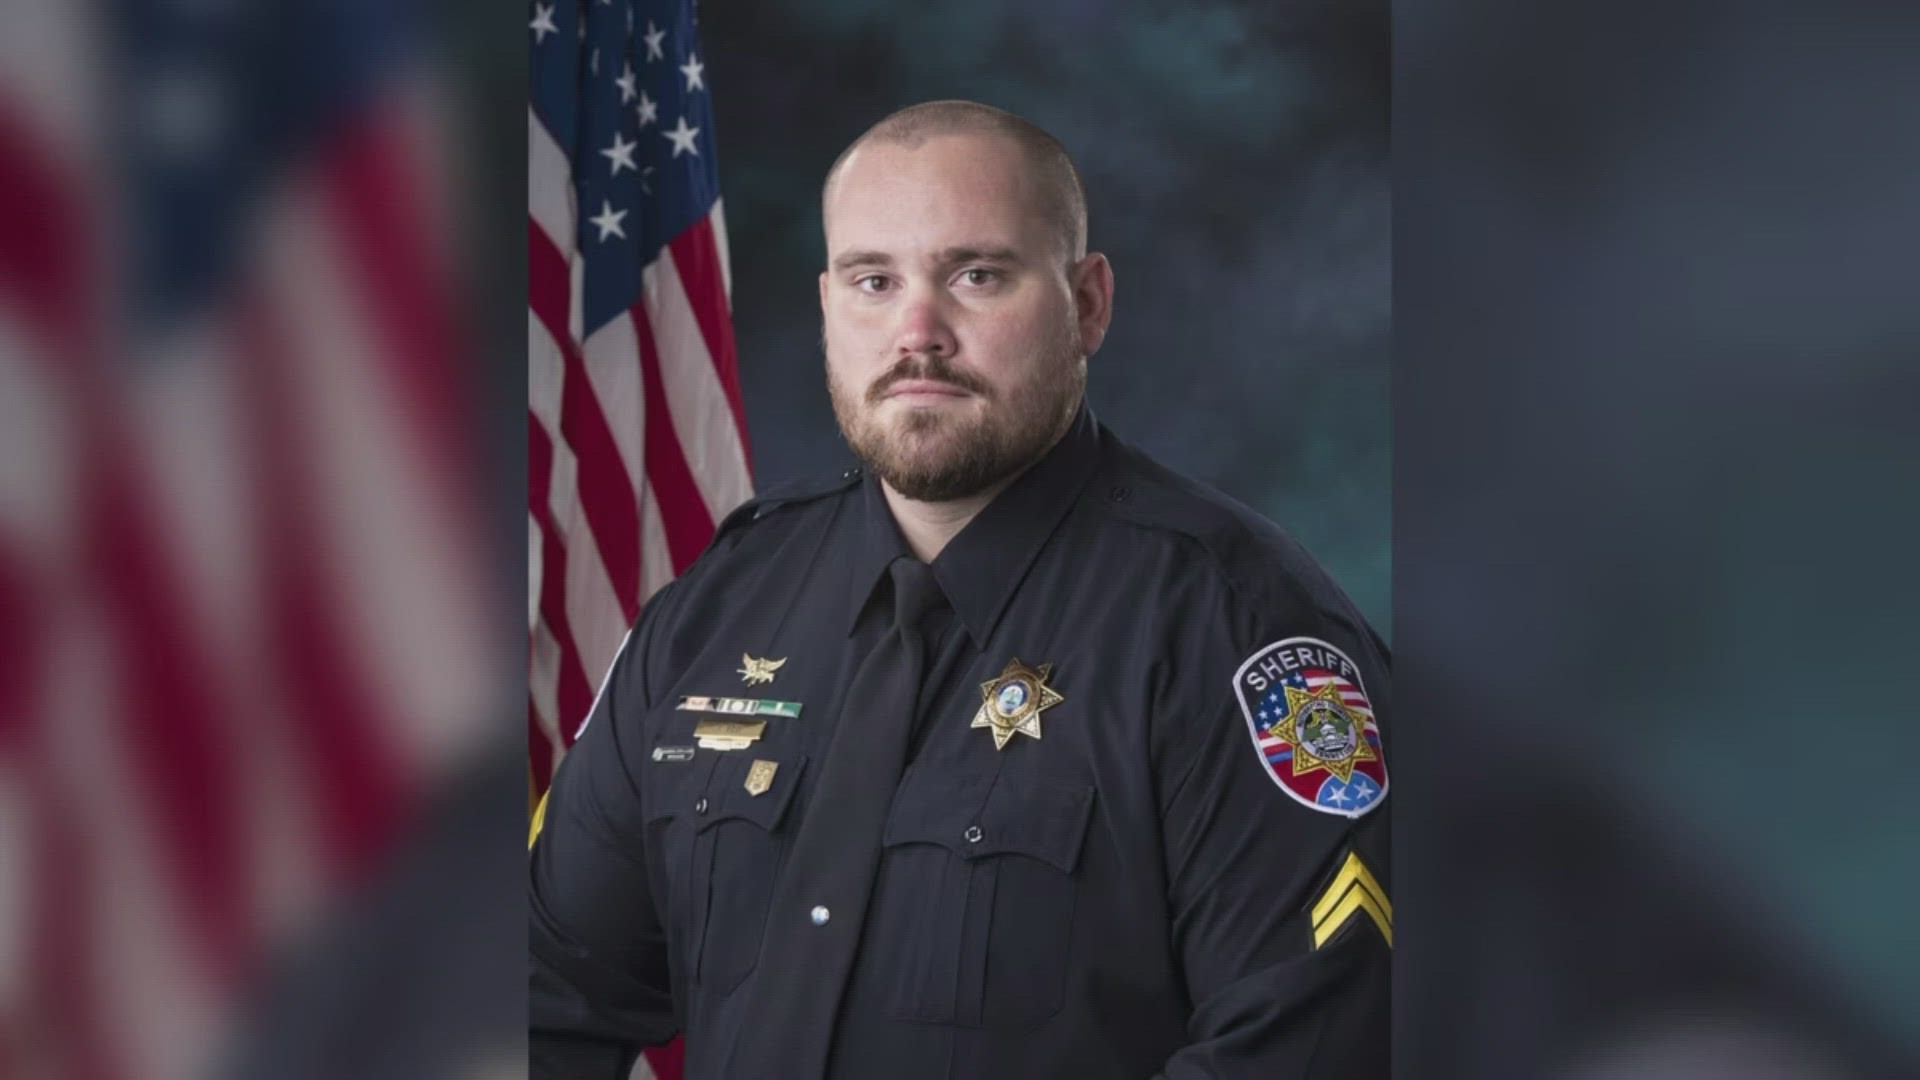 Detective Jacob Beu died from his injuries in a traffic crash on Sunday. He was a veteran sheriff's office deputy before being promoted to patrol corporal in 2021.